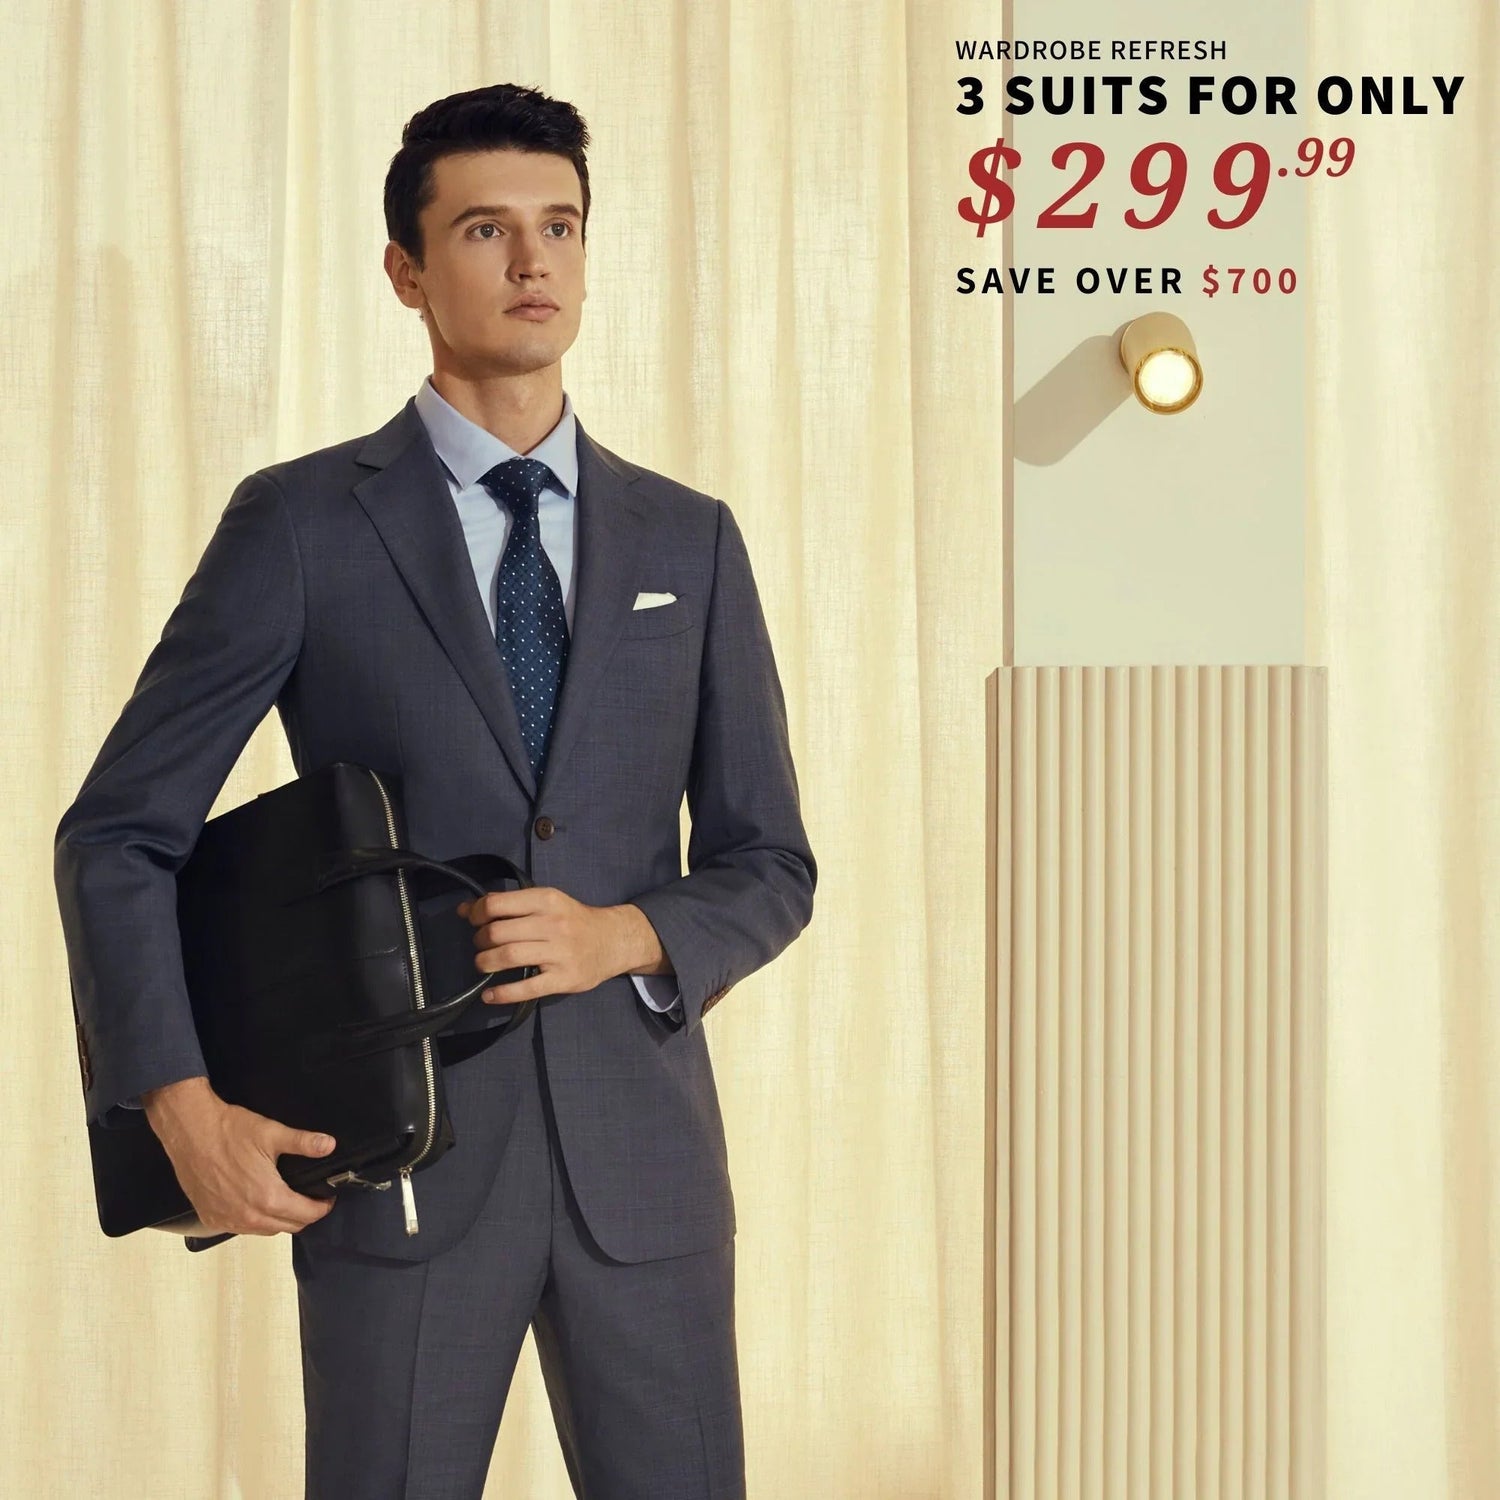 A man in a suit holding a briefcase, showcasing his BYOB brand 3 Suits for $299.